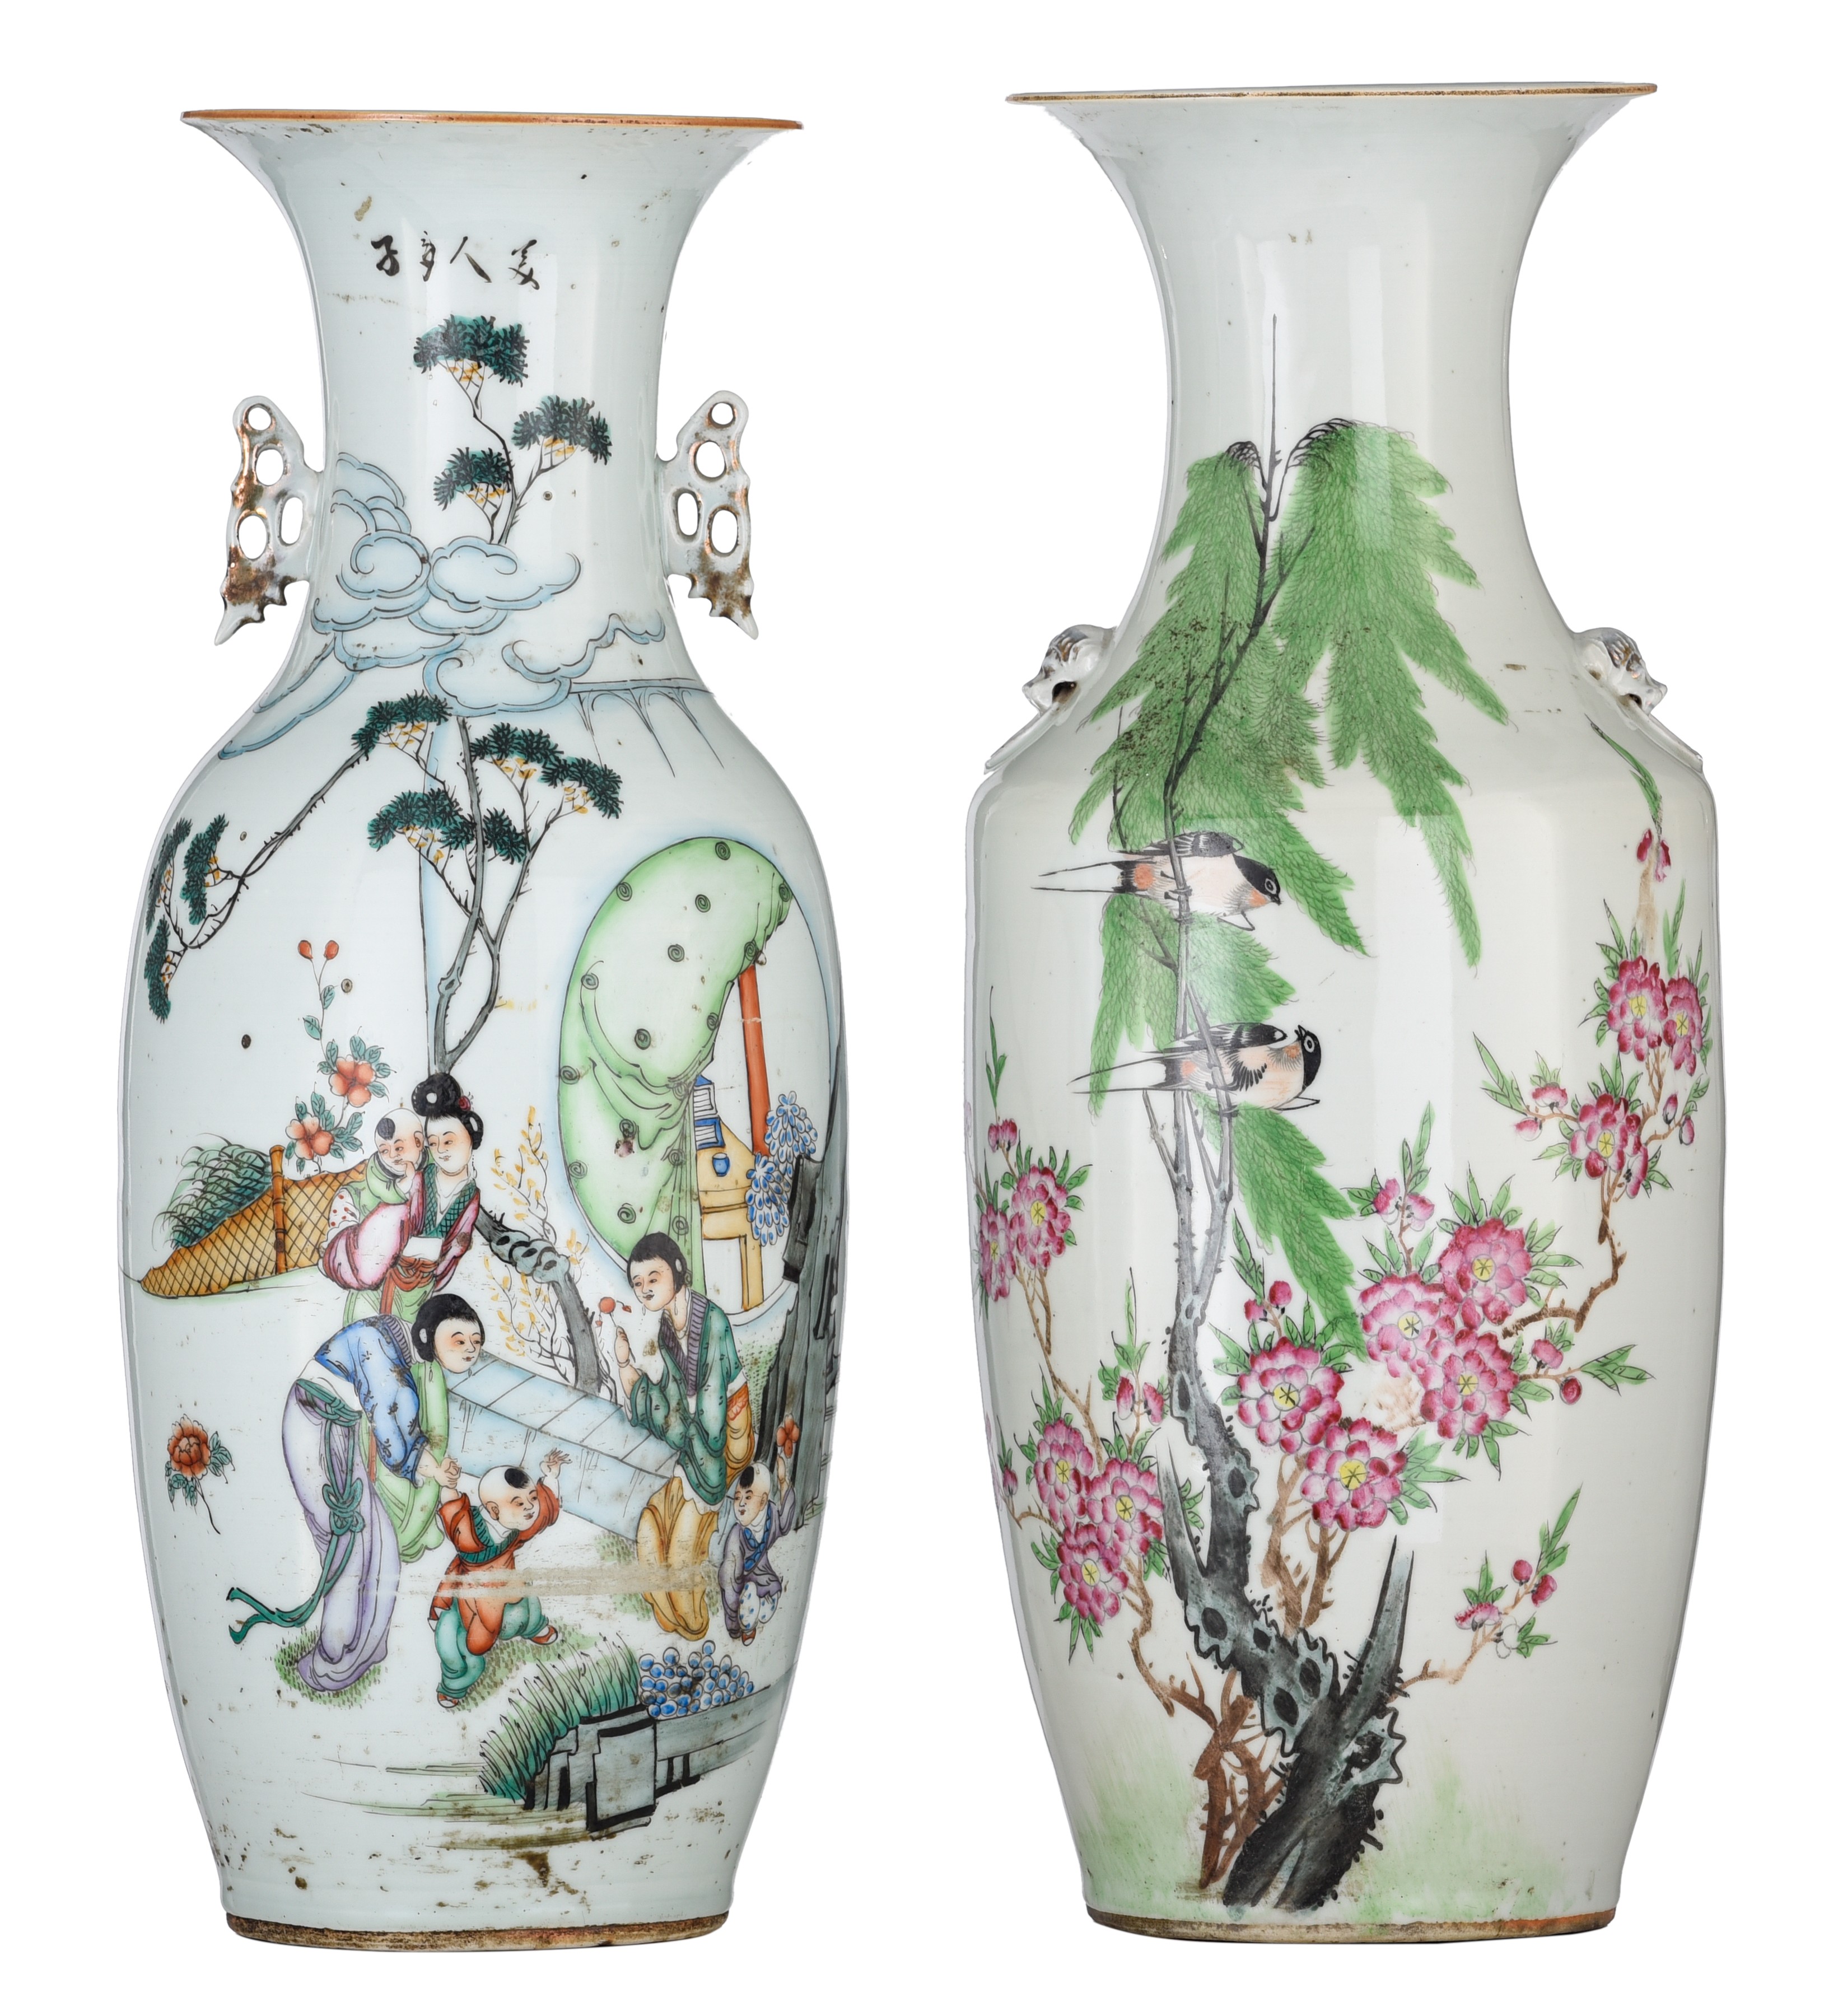 Two Chinese famille rose vases, one with a signed text, Republic period, H 57 - 57,5 cm